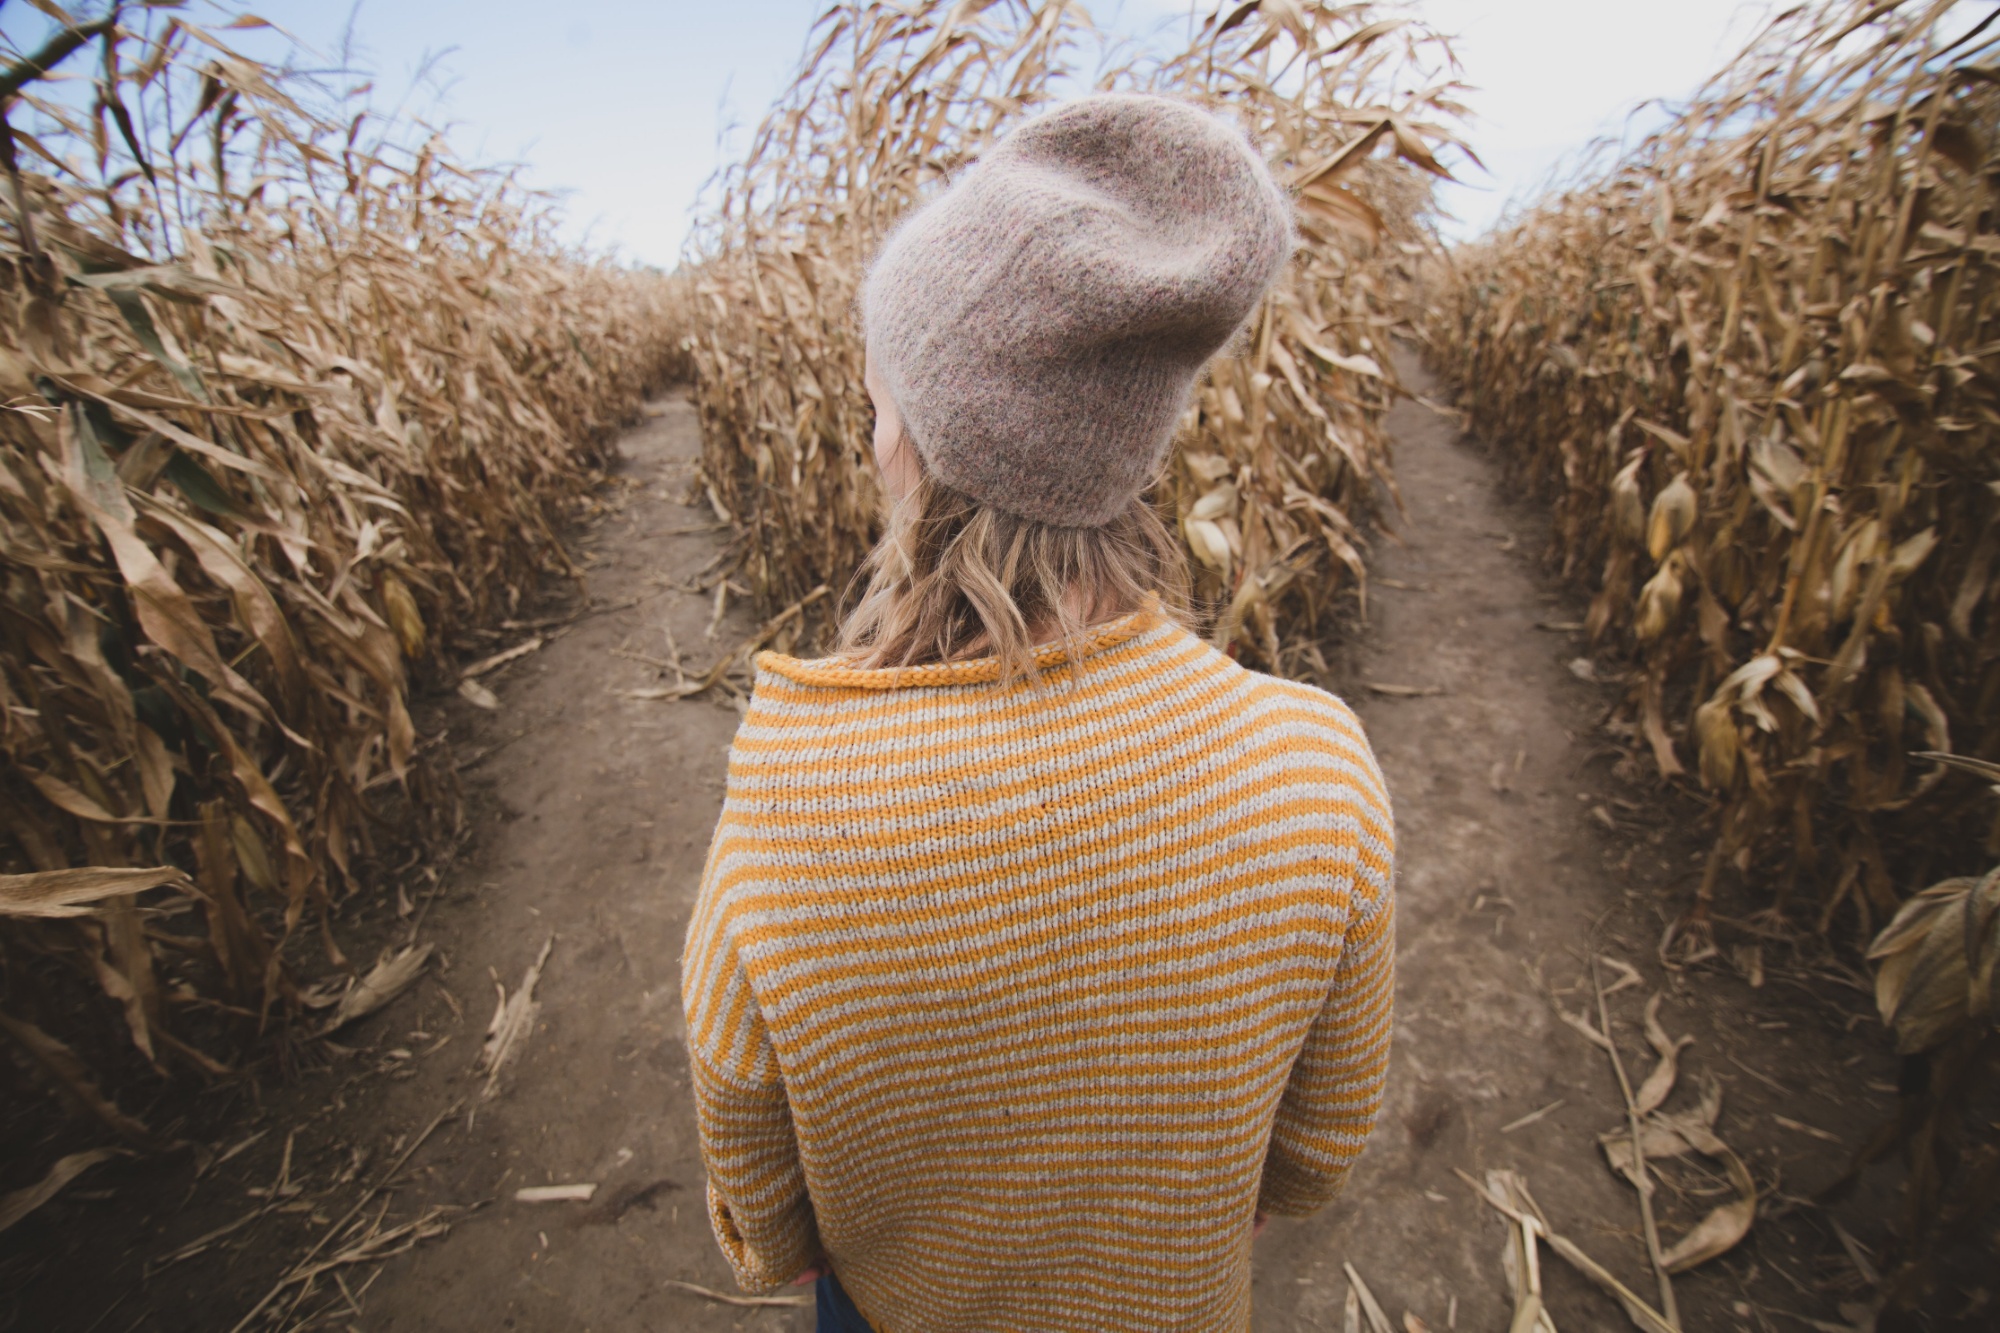 A young woman stands at beginning of two paths through a cornfield.